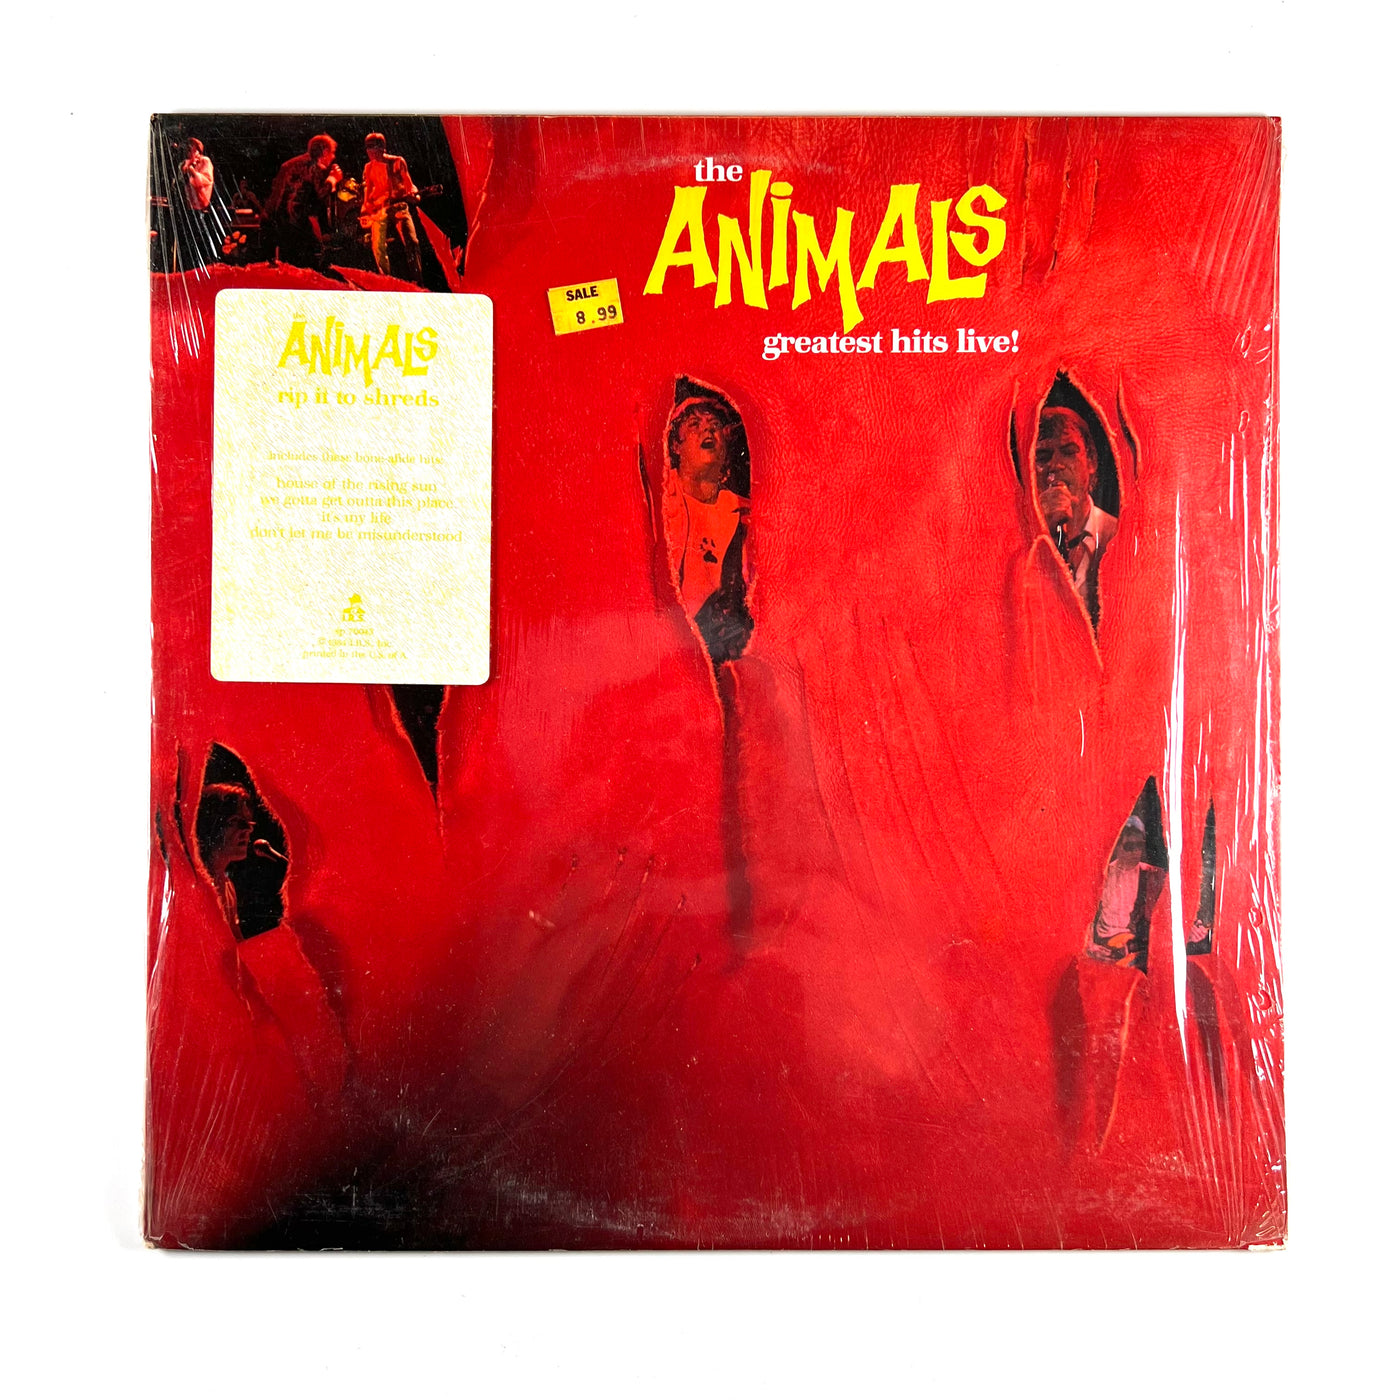 The Animals - Greatest Hits Live!